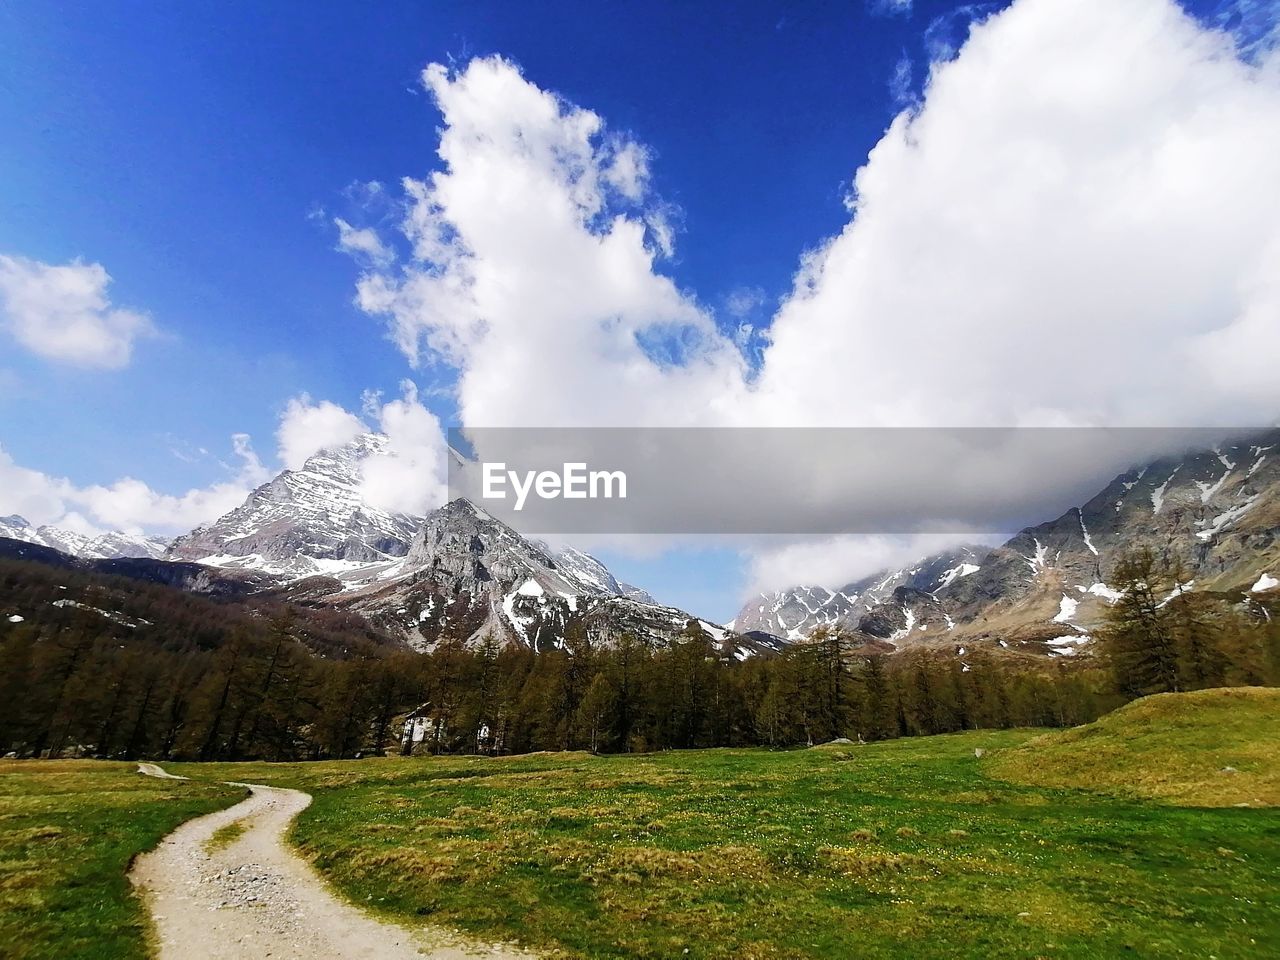 mountain, sky, environment, scenics - nature, landscape, cloud, mountain range, snow, beauty in nature, nature, meadow, plant, grass, cold temperature, land, winter, snowcapped mountain, travel, travel destinations, highland, no people, tree, mountain pass, tranquil scene, blue, tranquility, wilderness, plateau, grassland, tourism, mountain peak, non-urban scene, valley, green, pine tree, pinaceae, coniferous tree, forest, plain, road, pine woodland, outdoors, day, ridge, field, footpath, vacation, idyllic, rural area, trip, holiday, activity, summer, rural scene, cloudscape